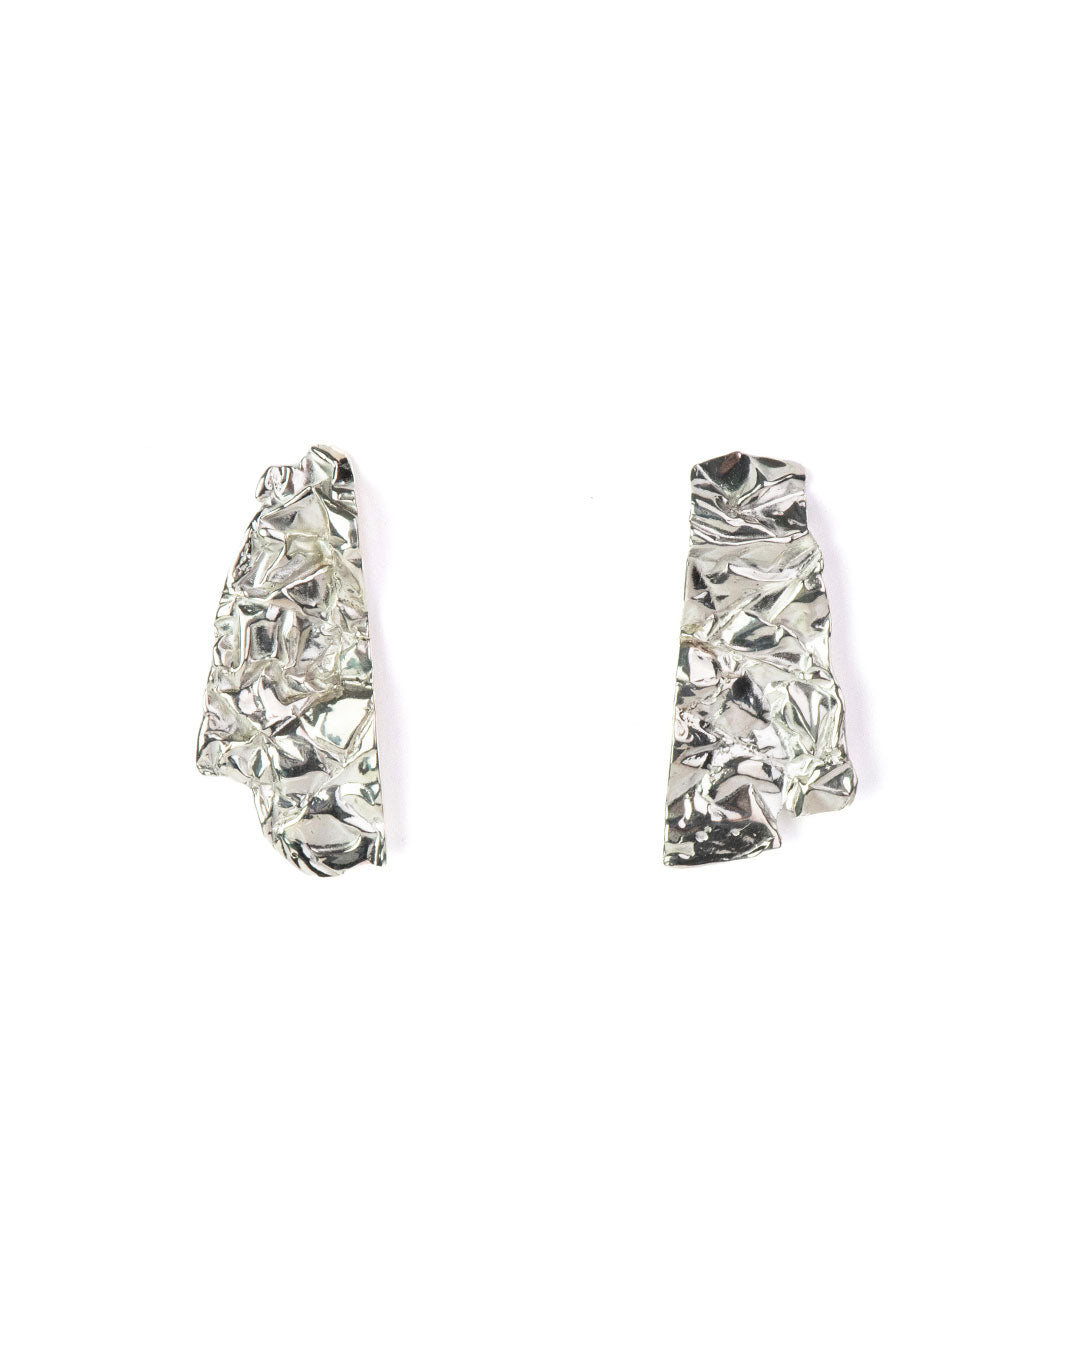 Andes Earrings jewerly Binome Atelier